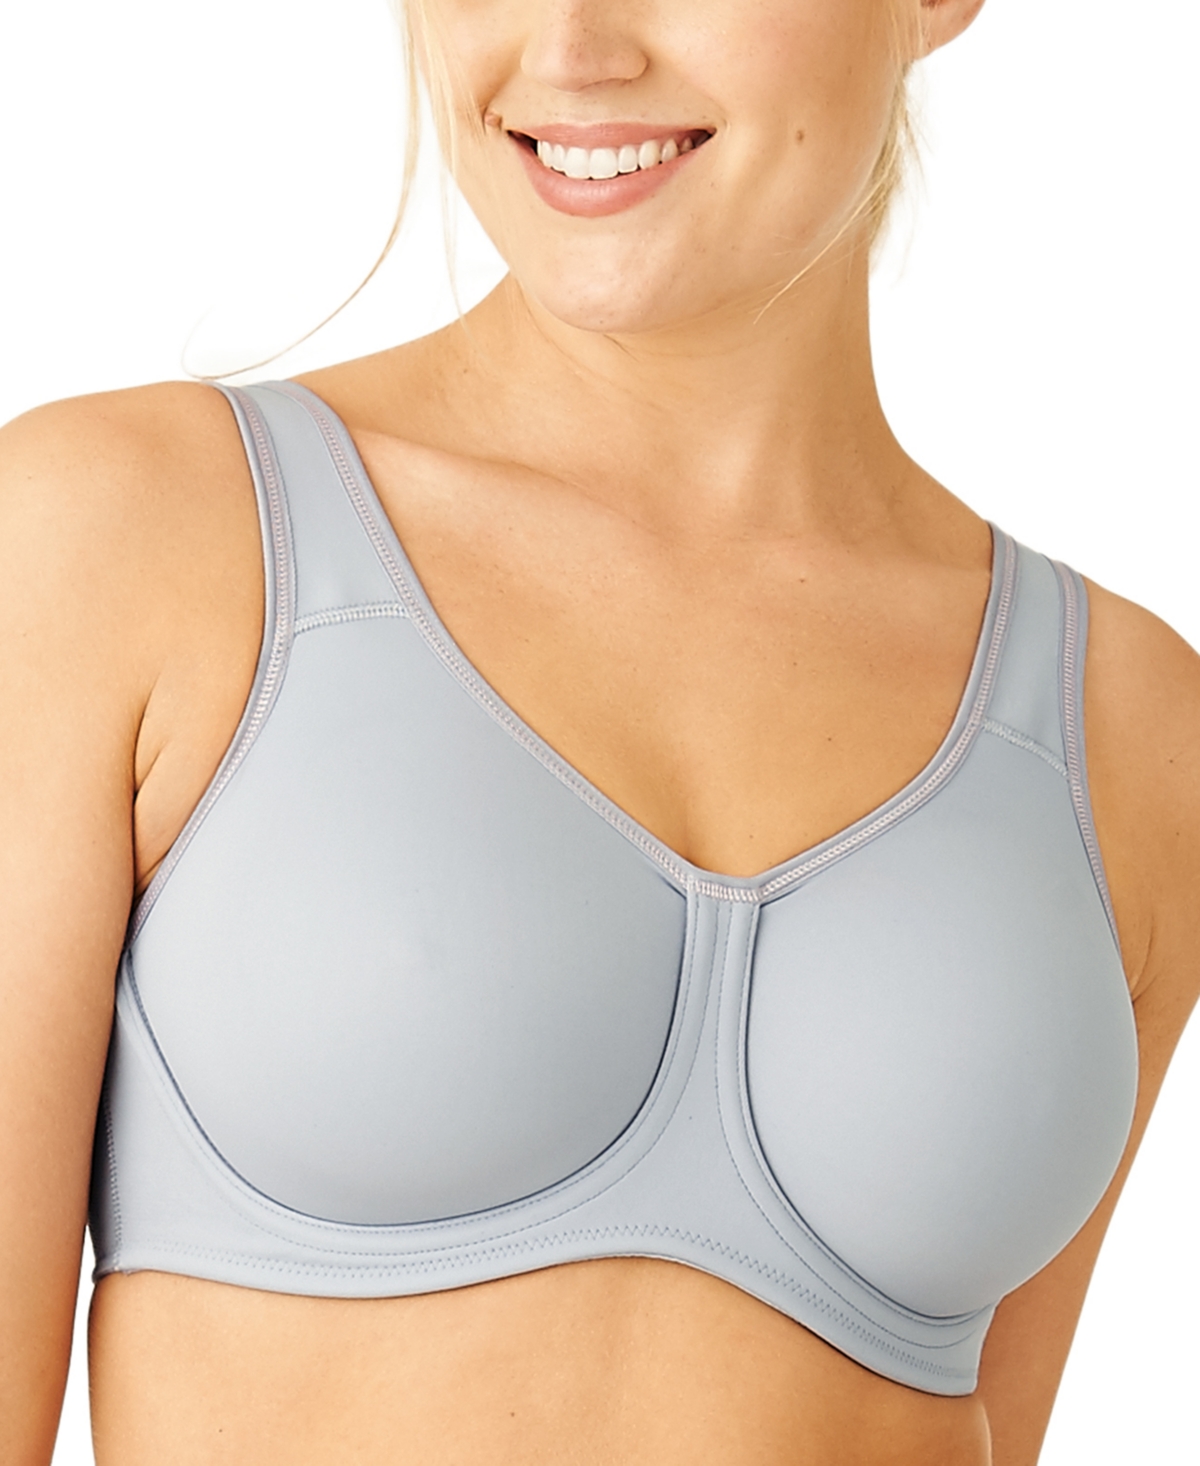 UPC 719544921015 product image for Wacoal Sport High-Impact Underwire Bra 855170, Up To I Cup | upcitemdb.com